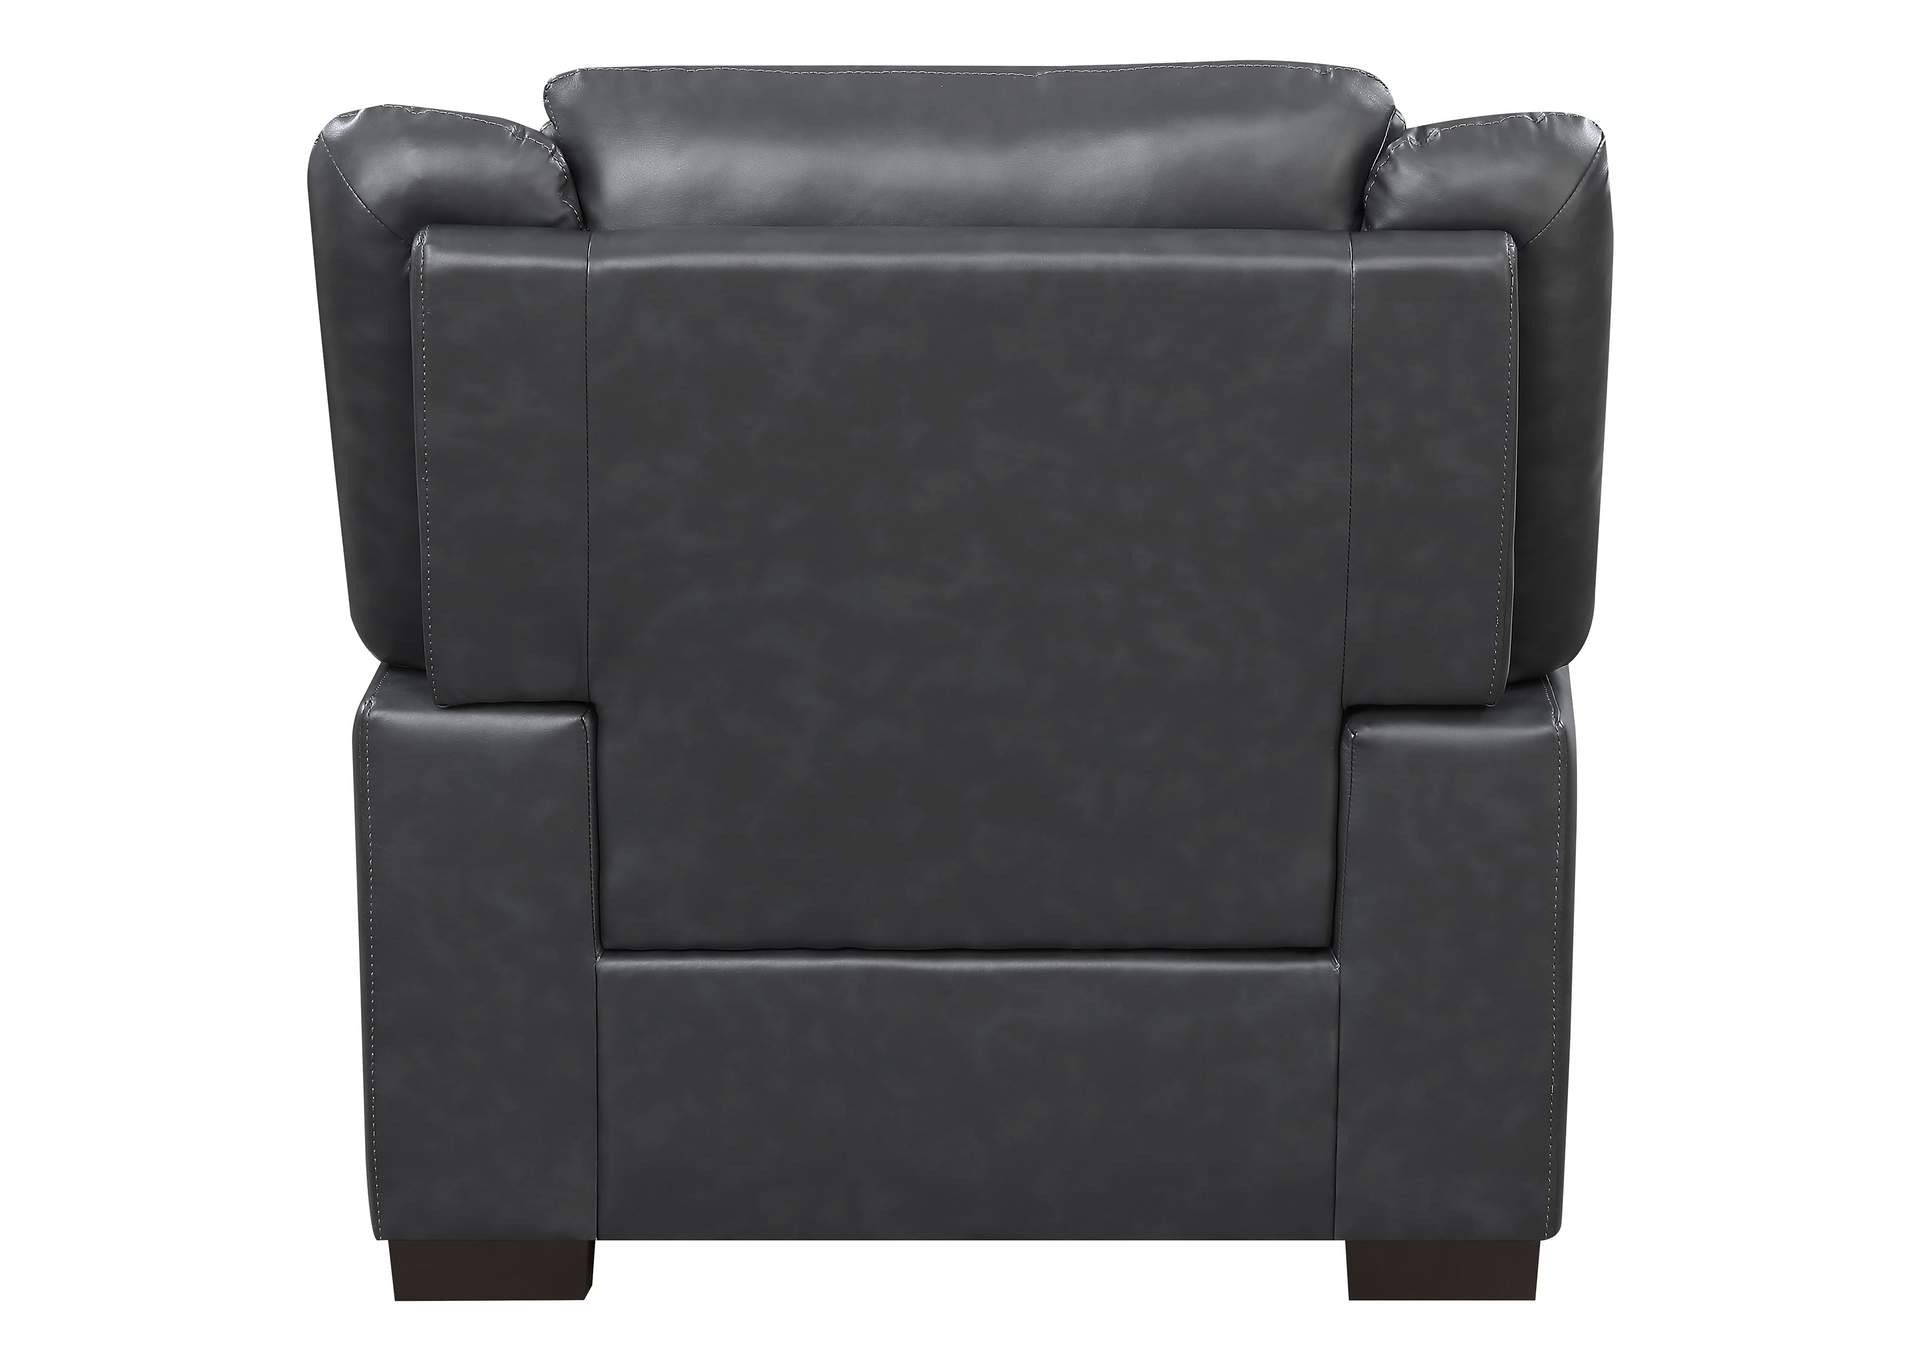 Arabella Pillow Top Upholstered Chair Grey,Coaster Furniture